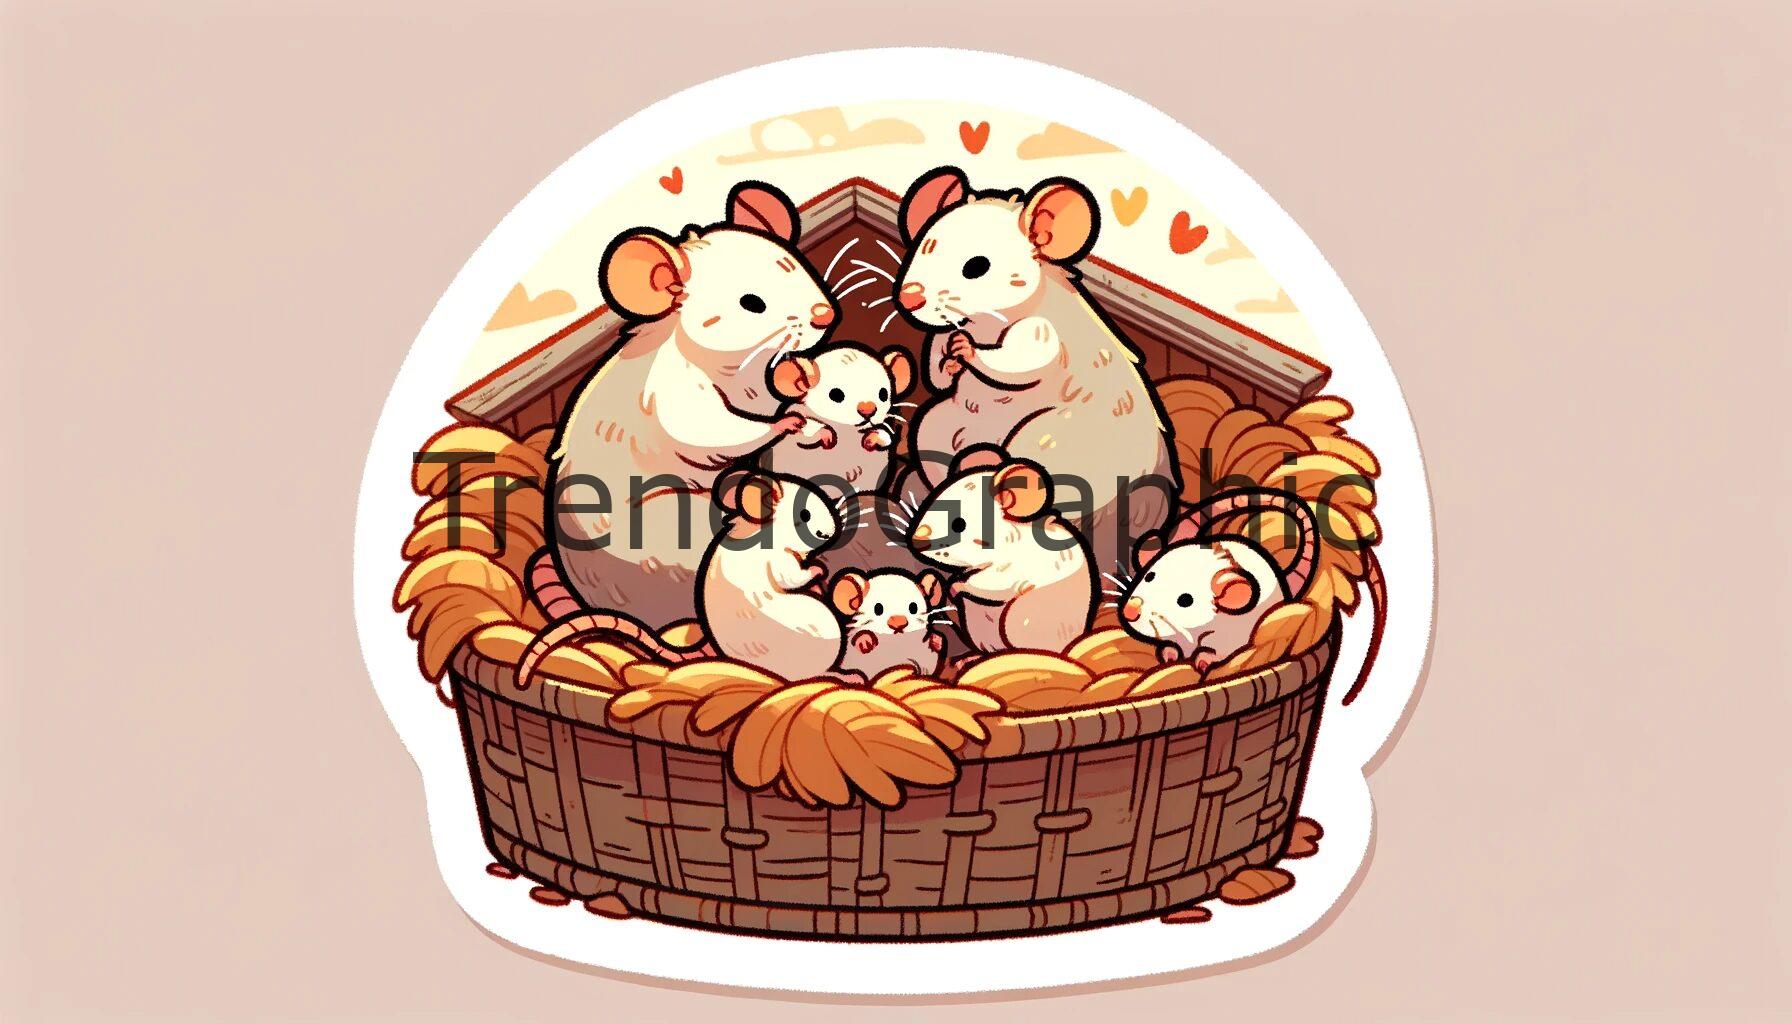 Cozy Family Moments: The Warmth of a Rat Nest